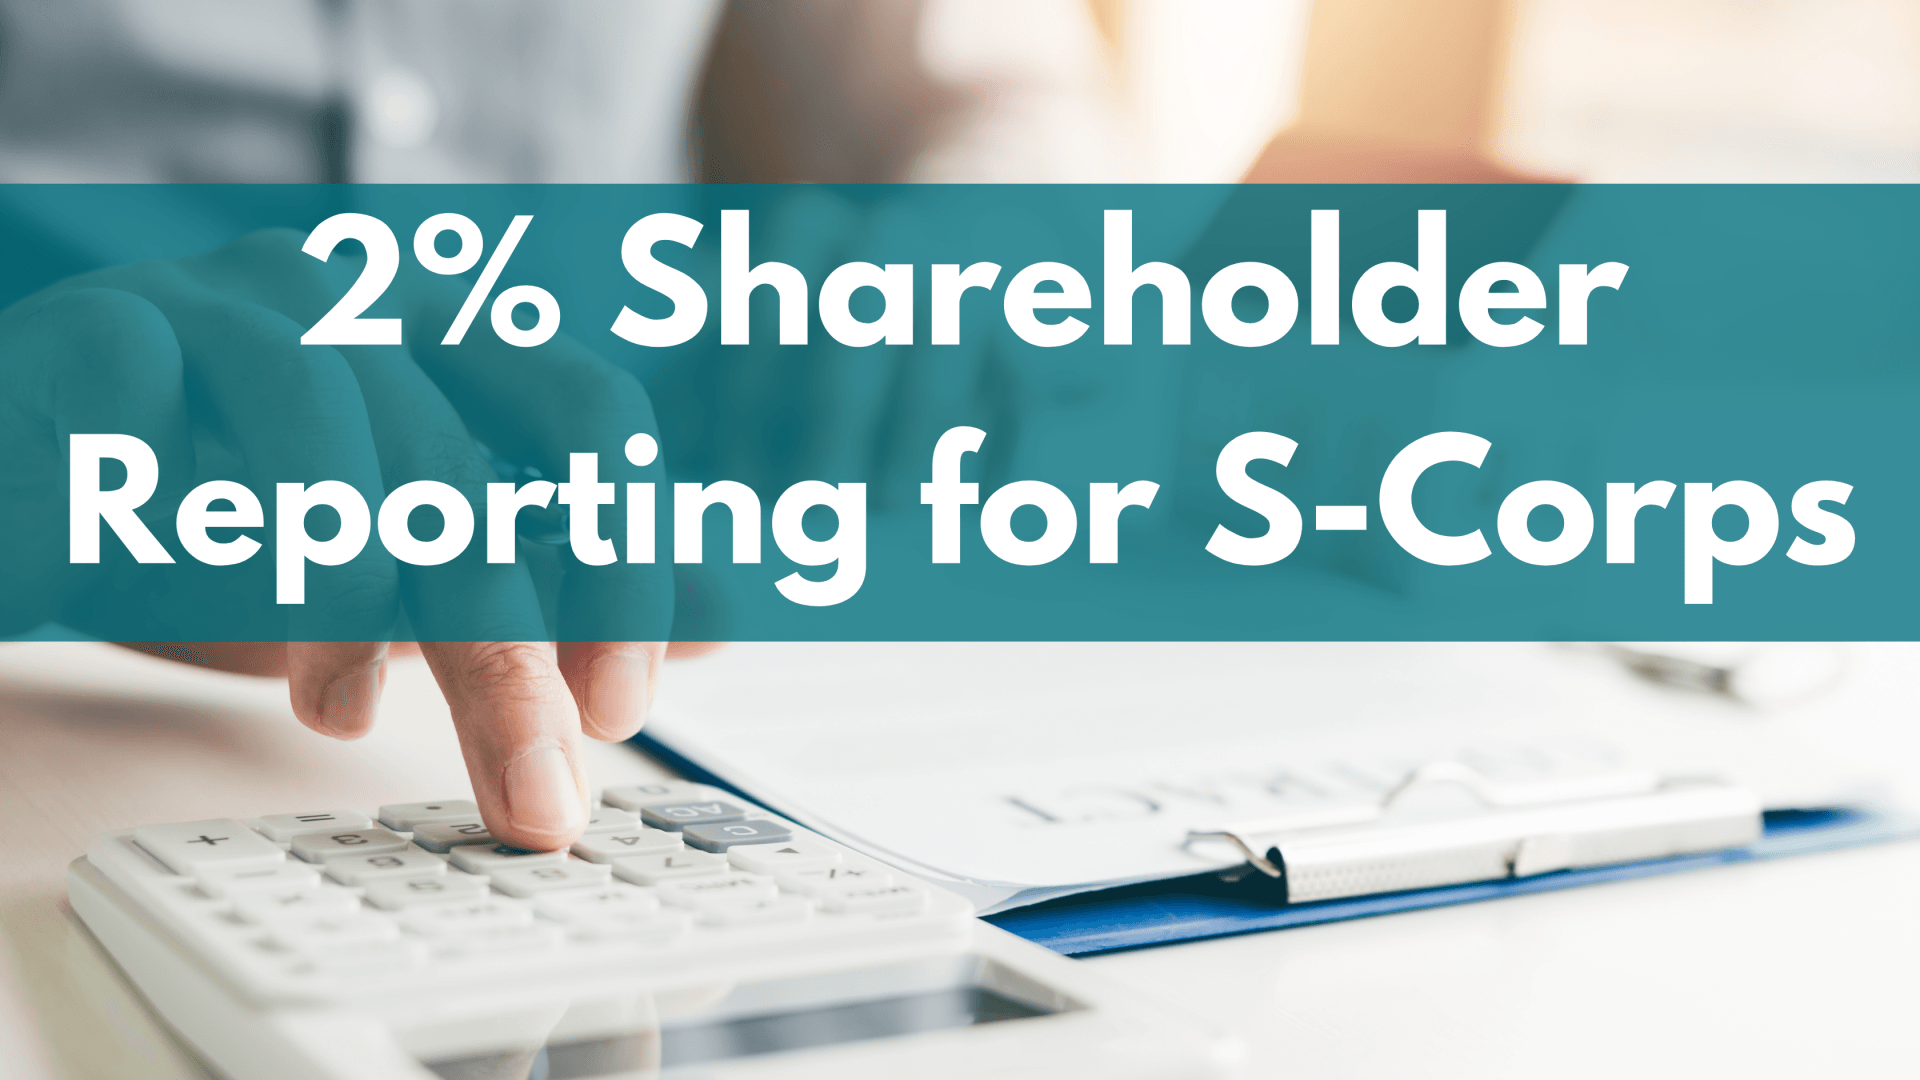 2% Shareholder Reporting for S-Corps